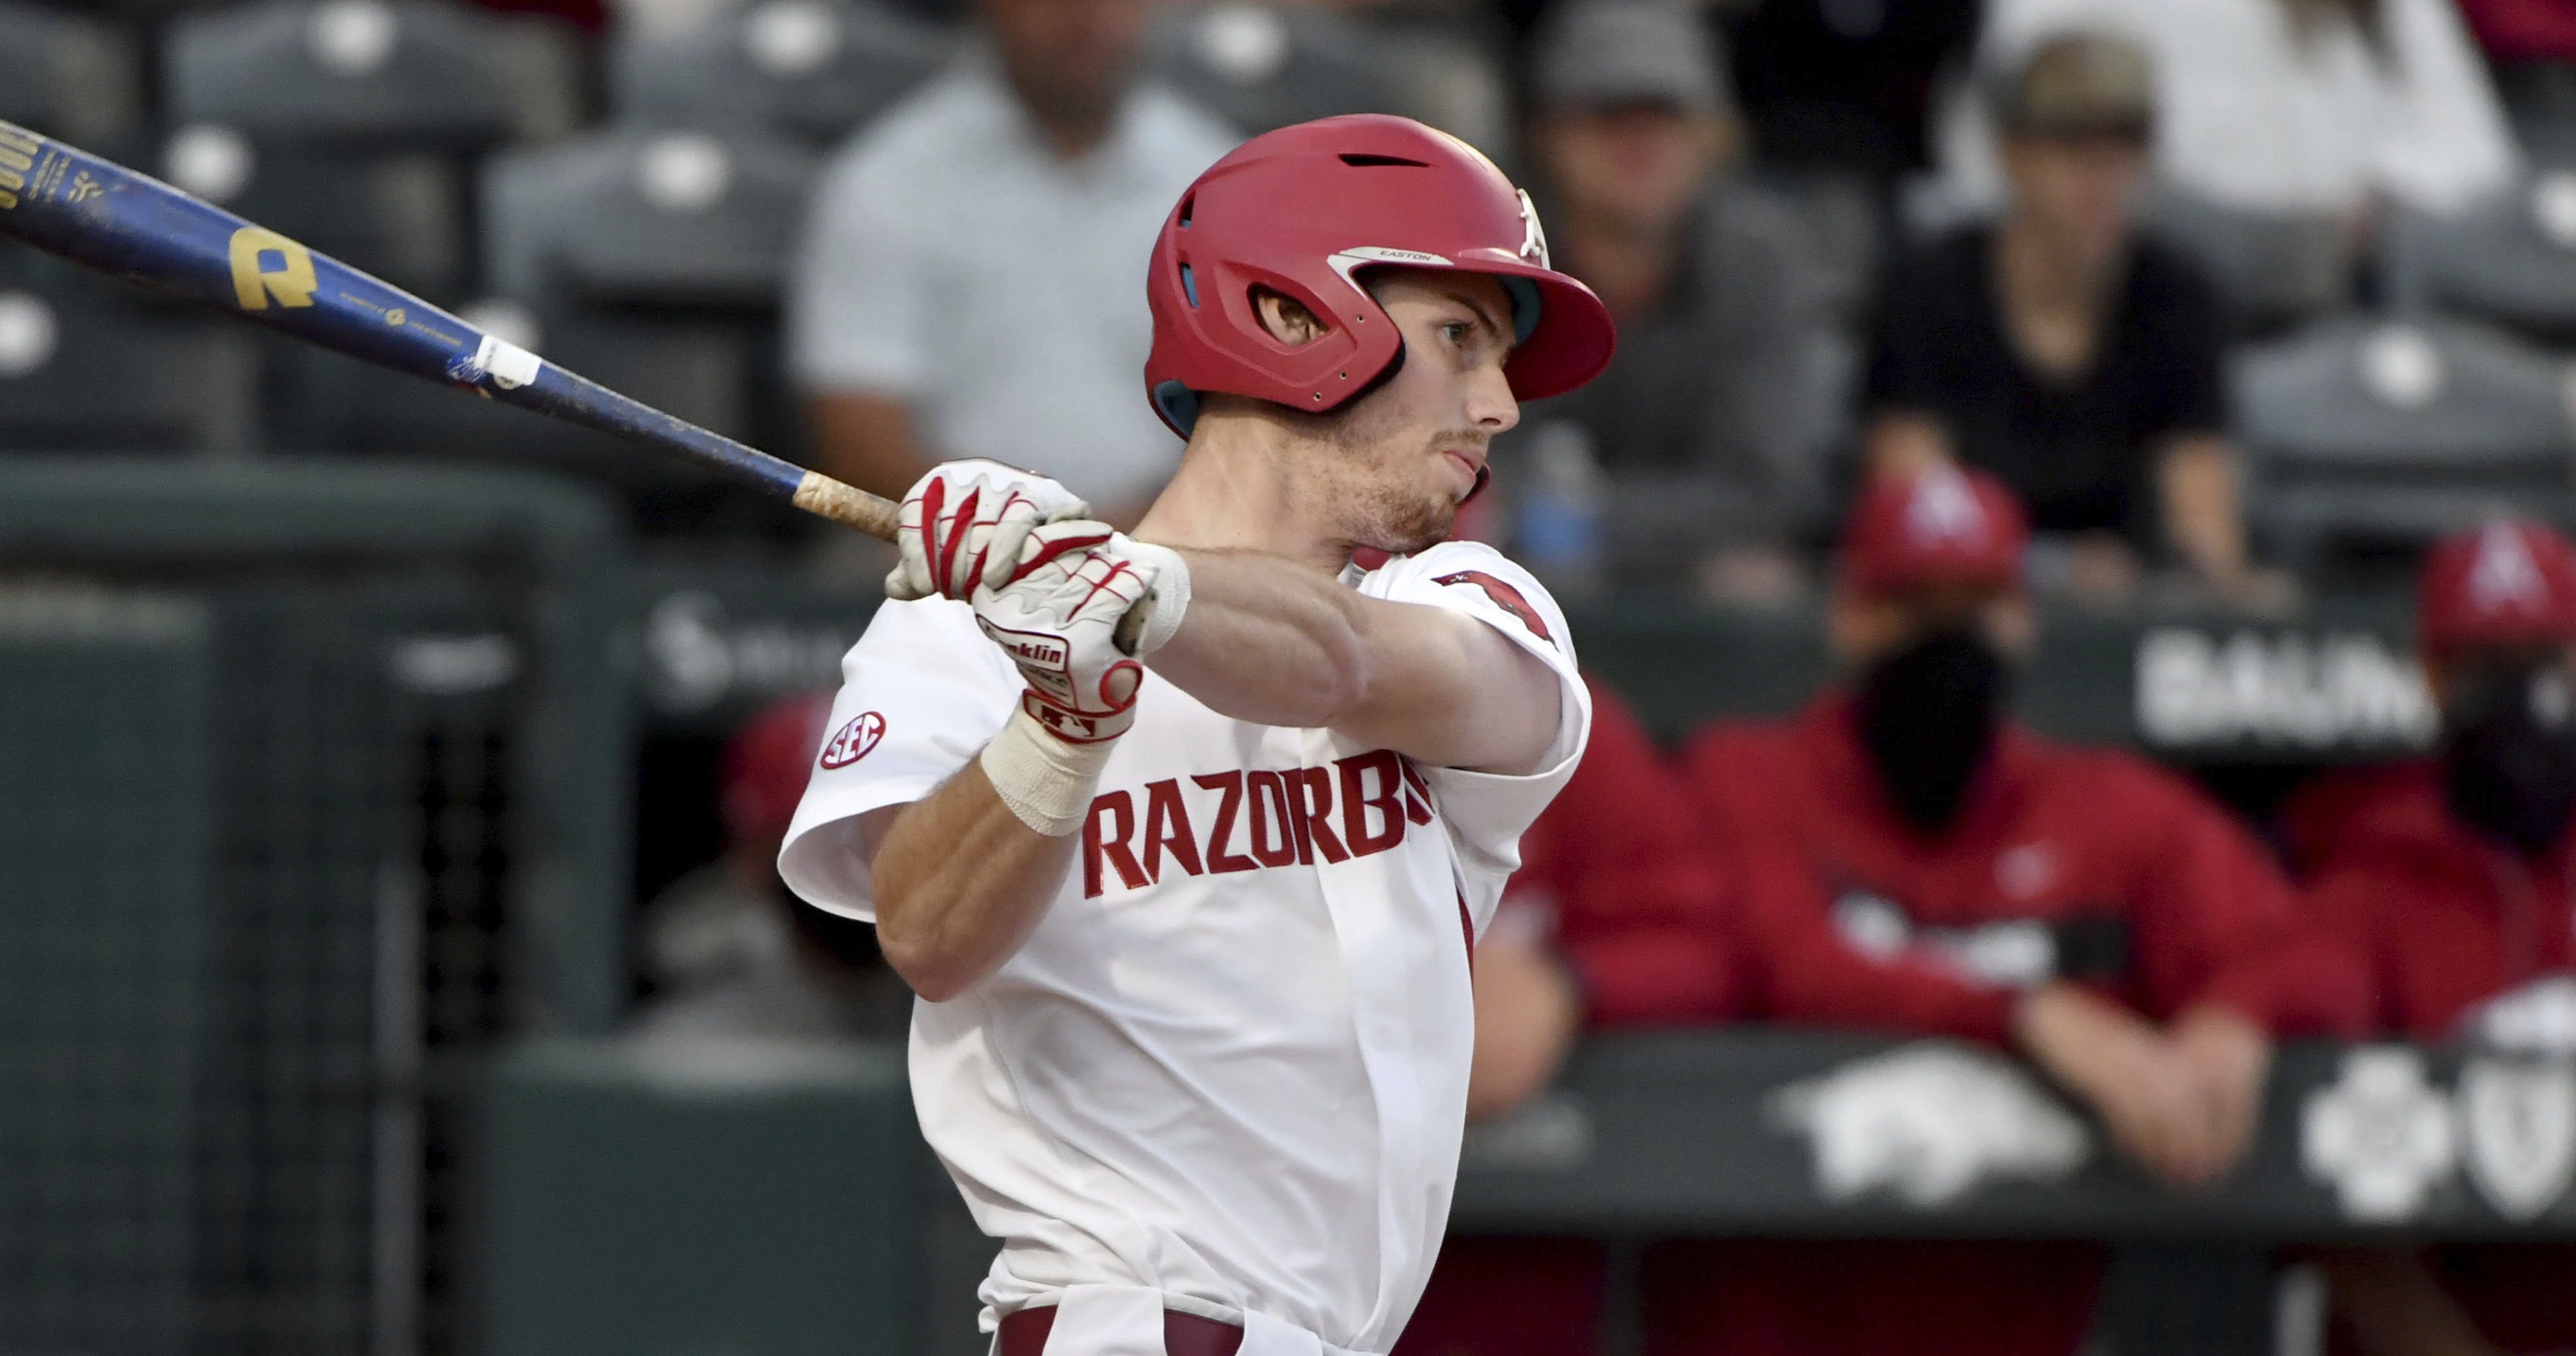 The silver linings for Mississippi State in its 8-2 Game 1 loss